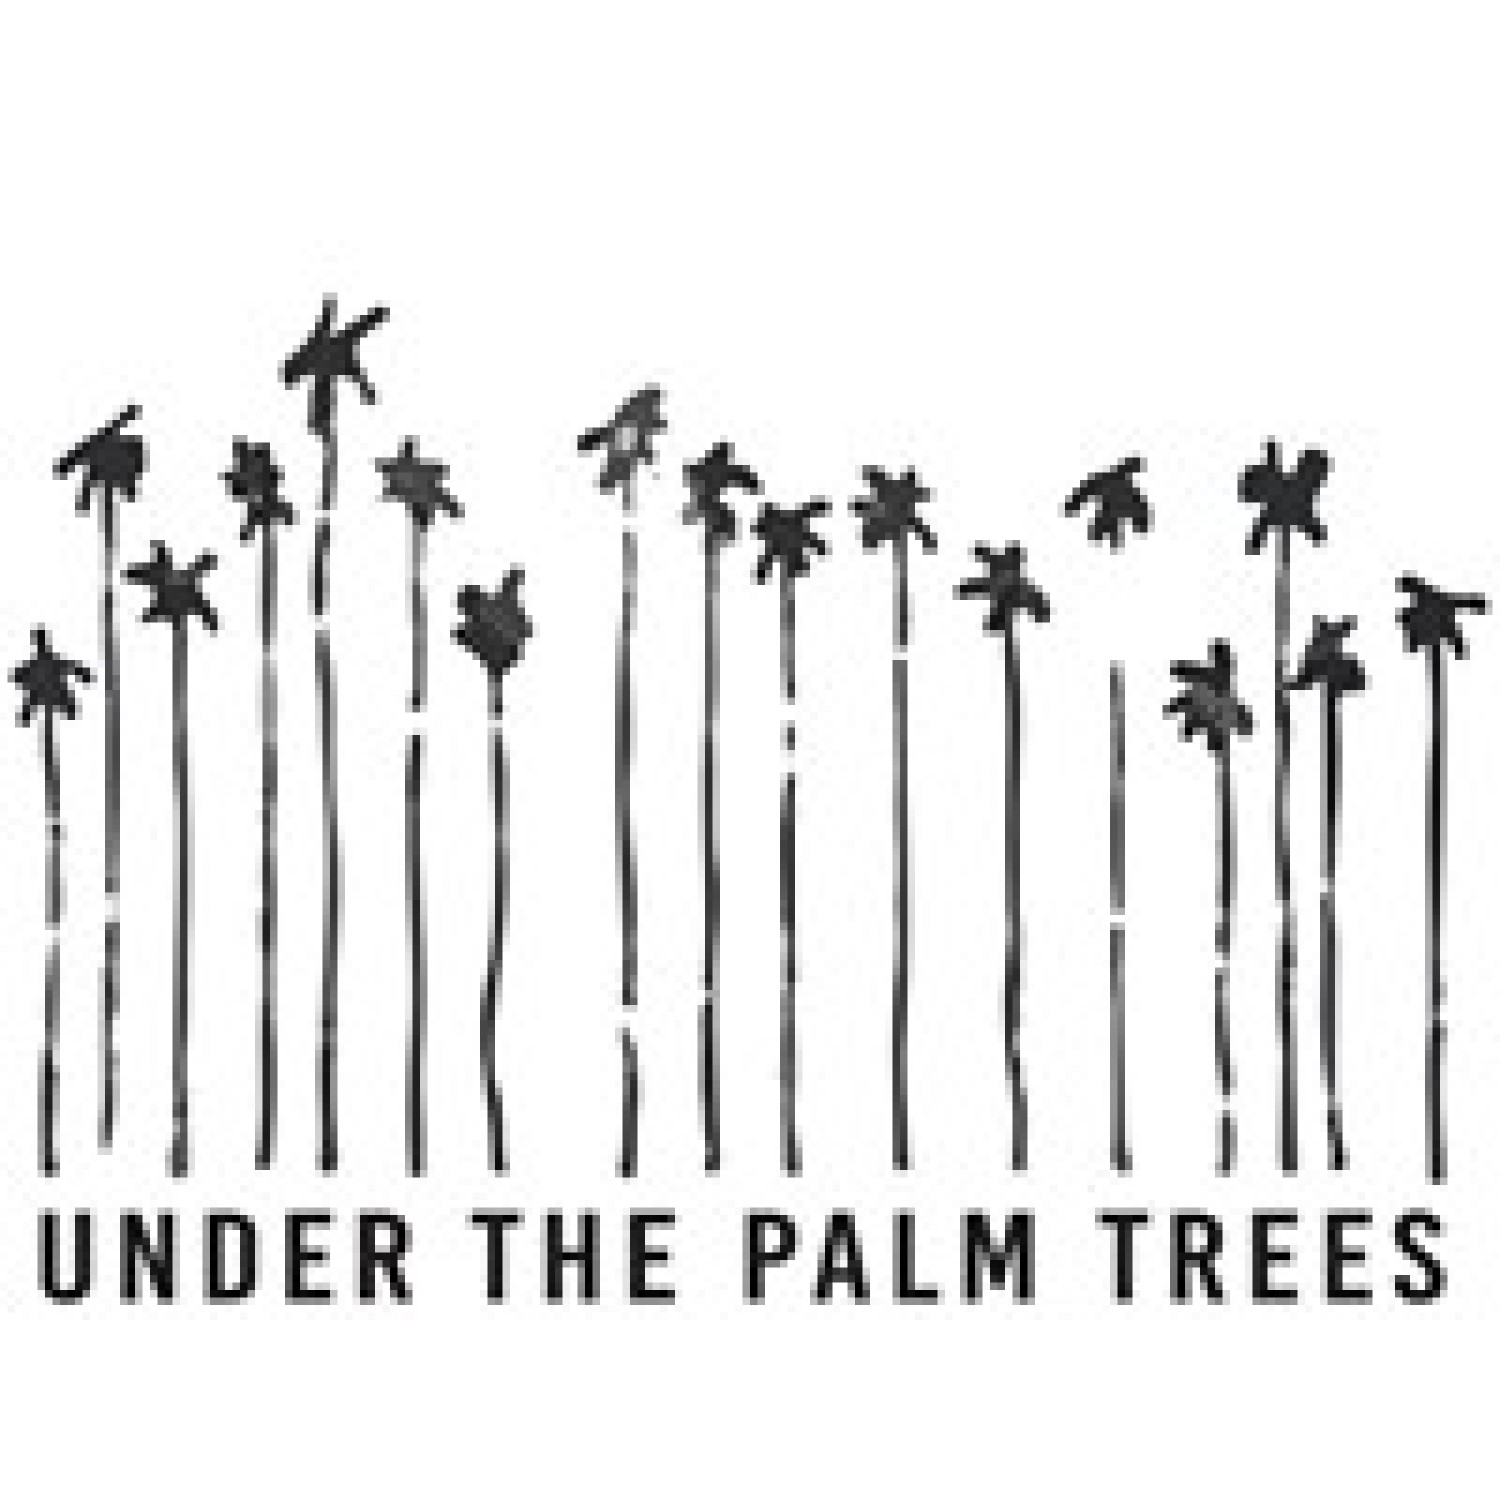 Under The Palm Trees